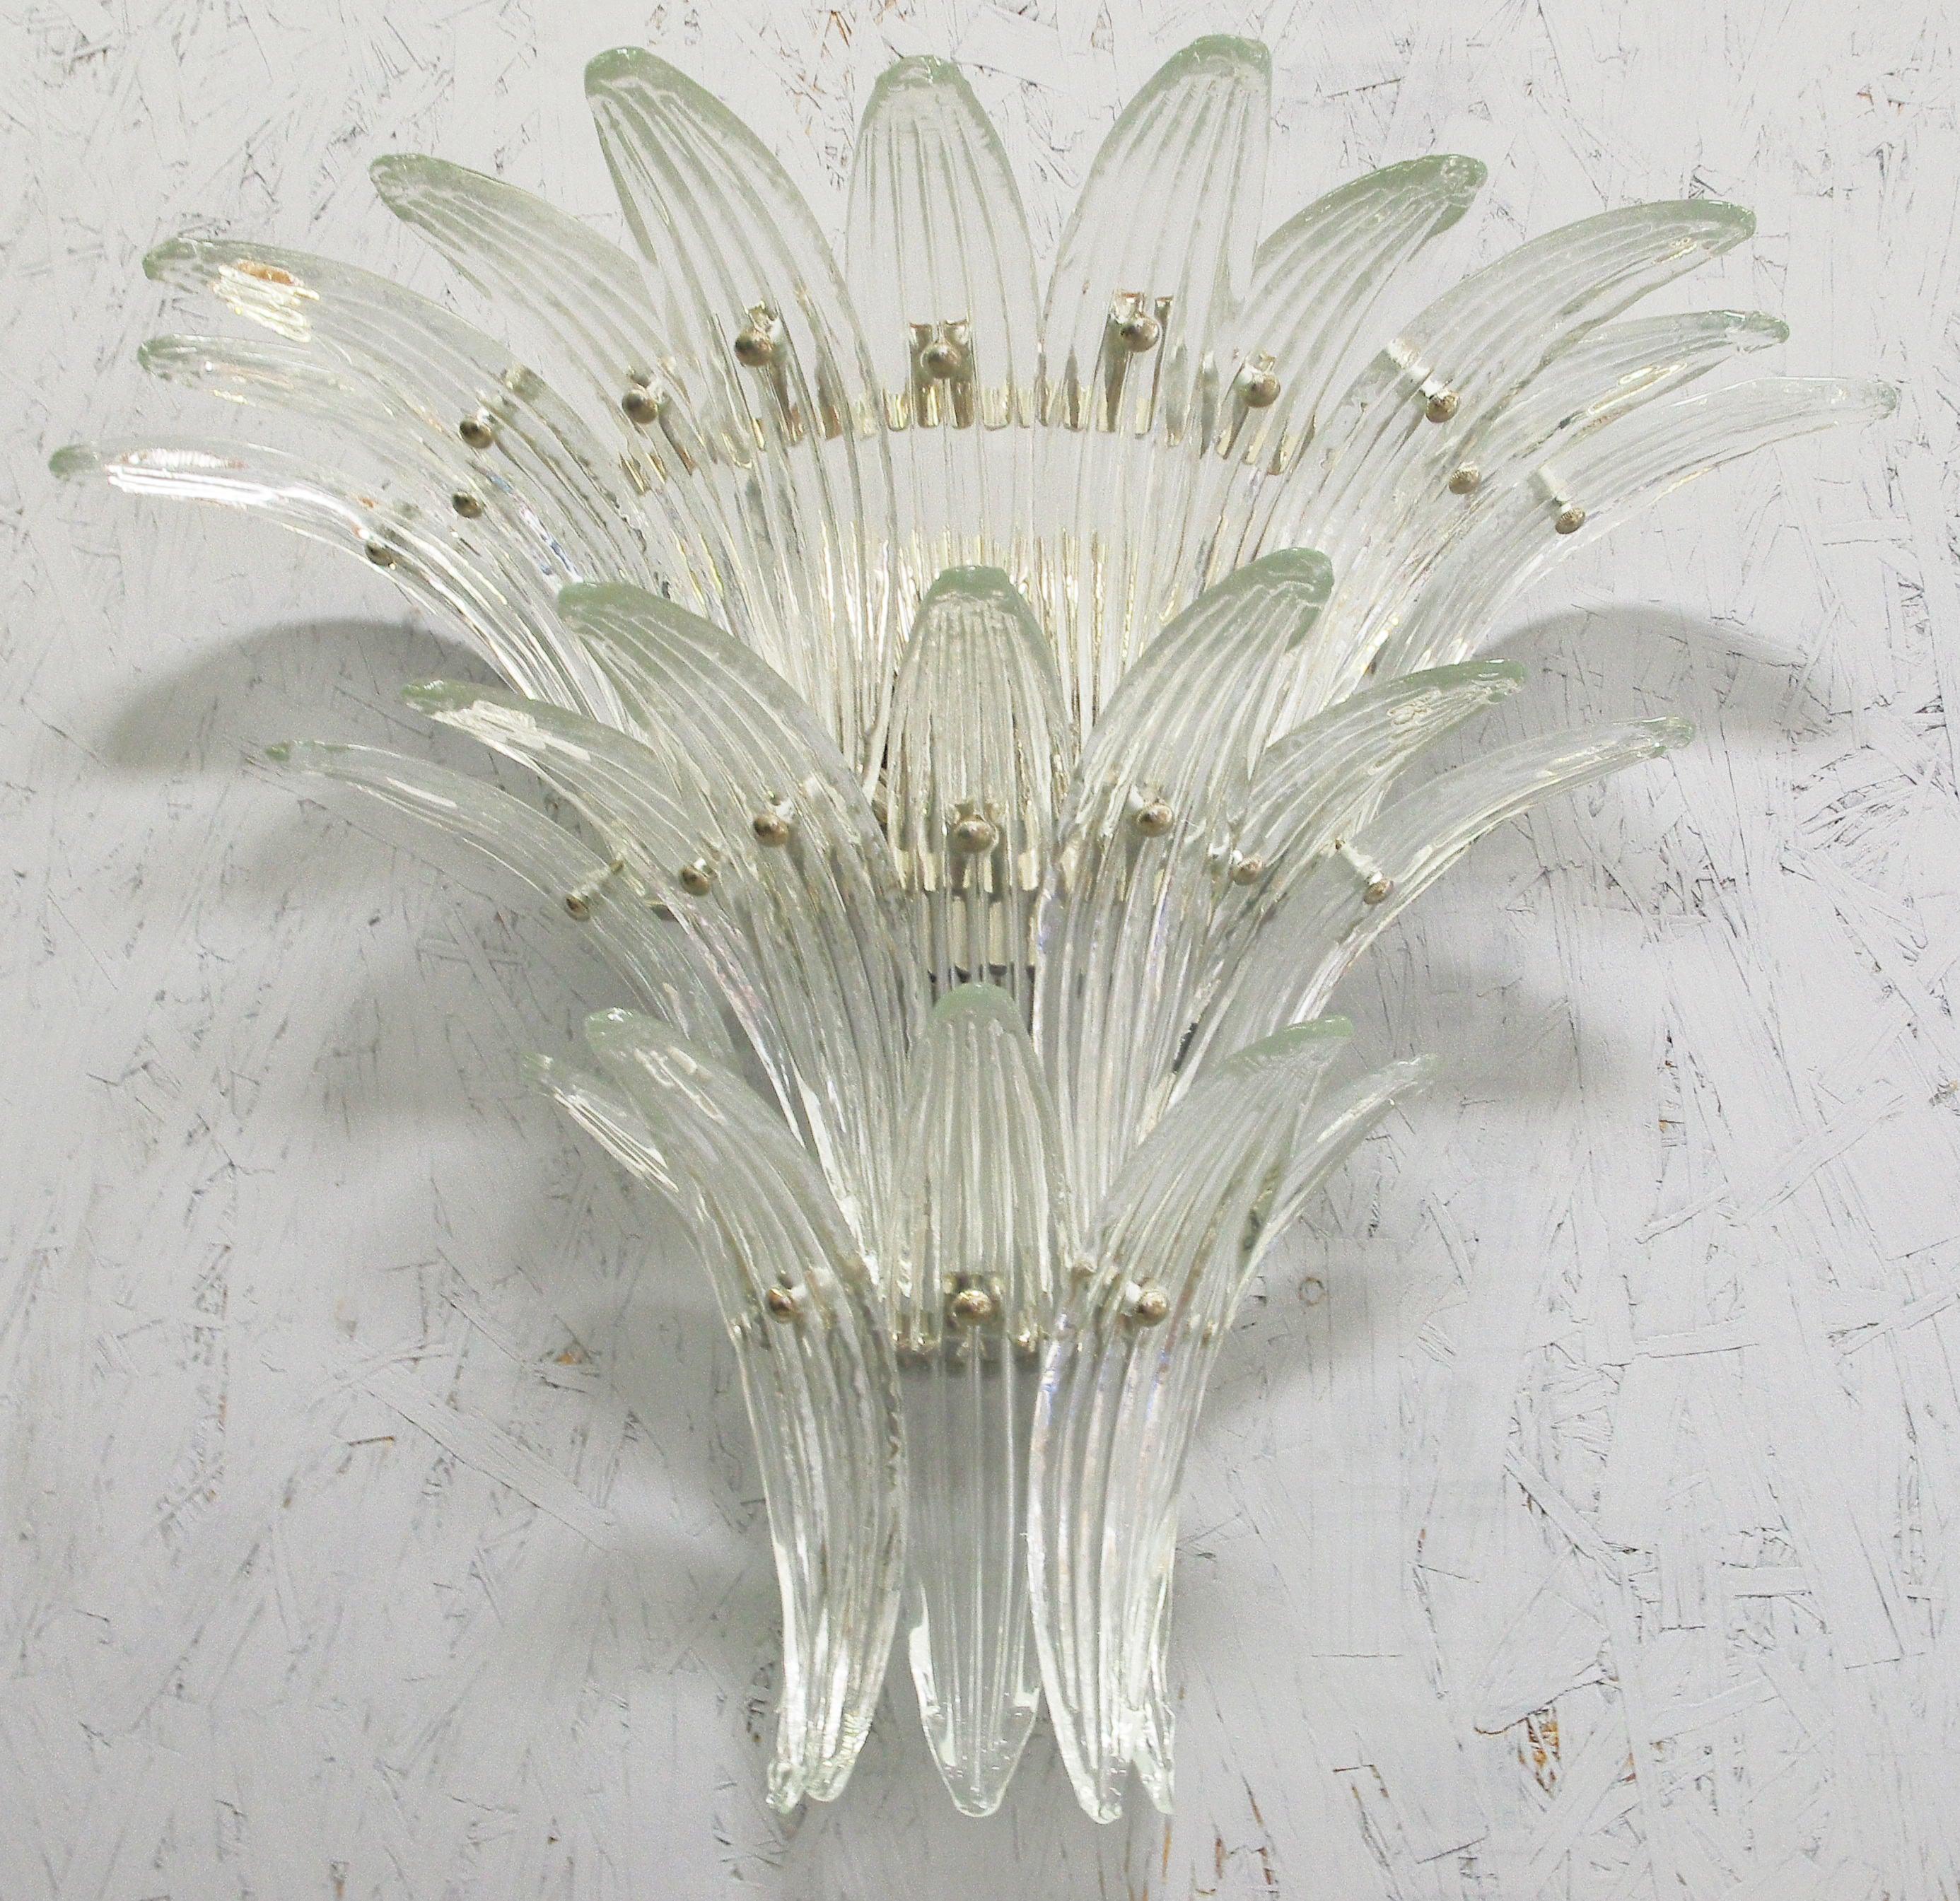 Italian Palmette wall light with 23 clear Murano glass leaves, mounted on chrome finish metal frame by Fabio Ltd / Made in Italy
3 lights / E12 or E14 type / max 40W each
Measures: Width 27 inches, height 20 inches, depth 10 inches
Order Only / This